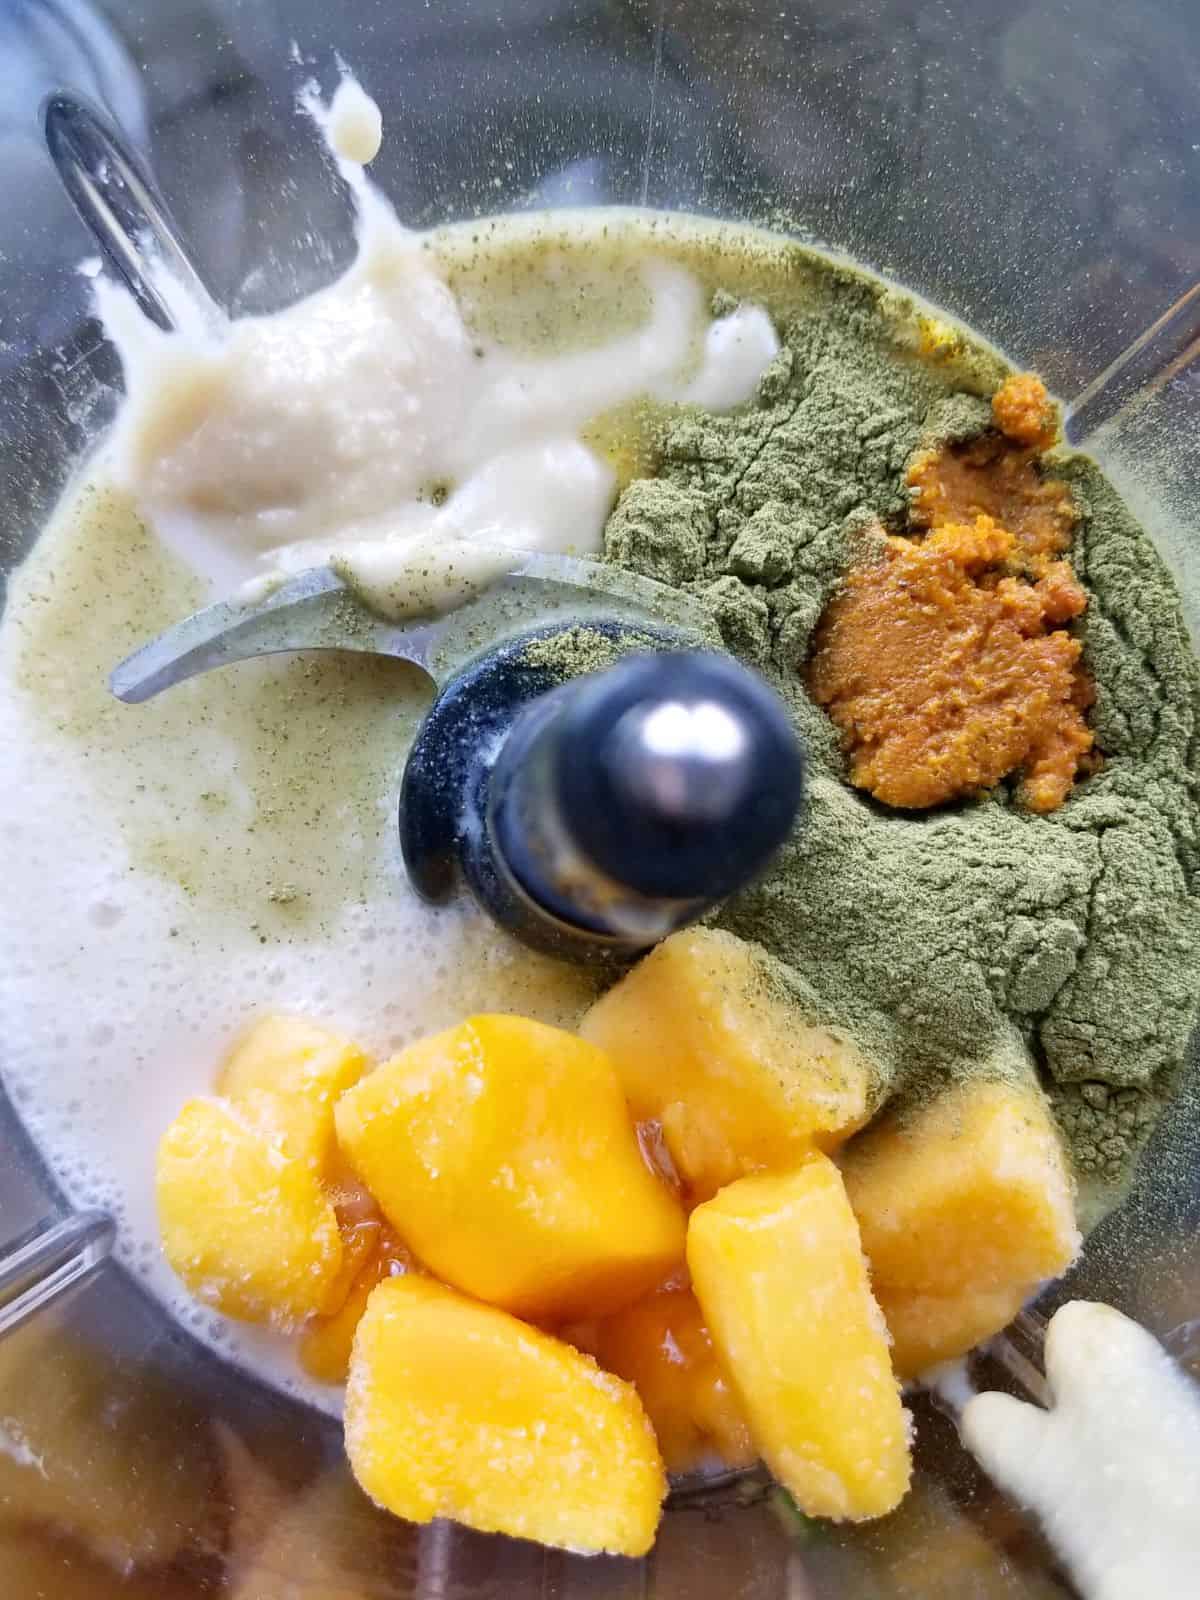 mango chunks, moringa powder, turmeric paste, coconut milk, macadamia nut butter, and other ingredients in a blender.